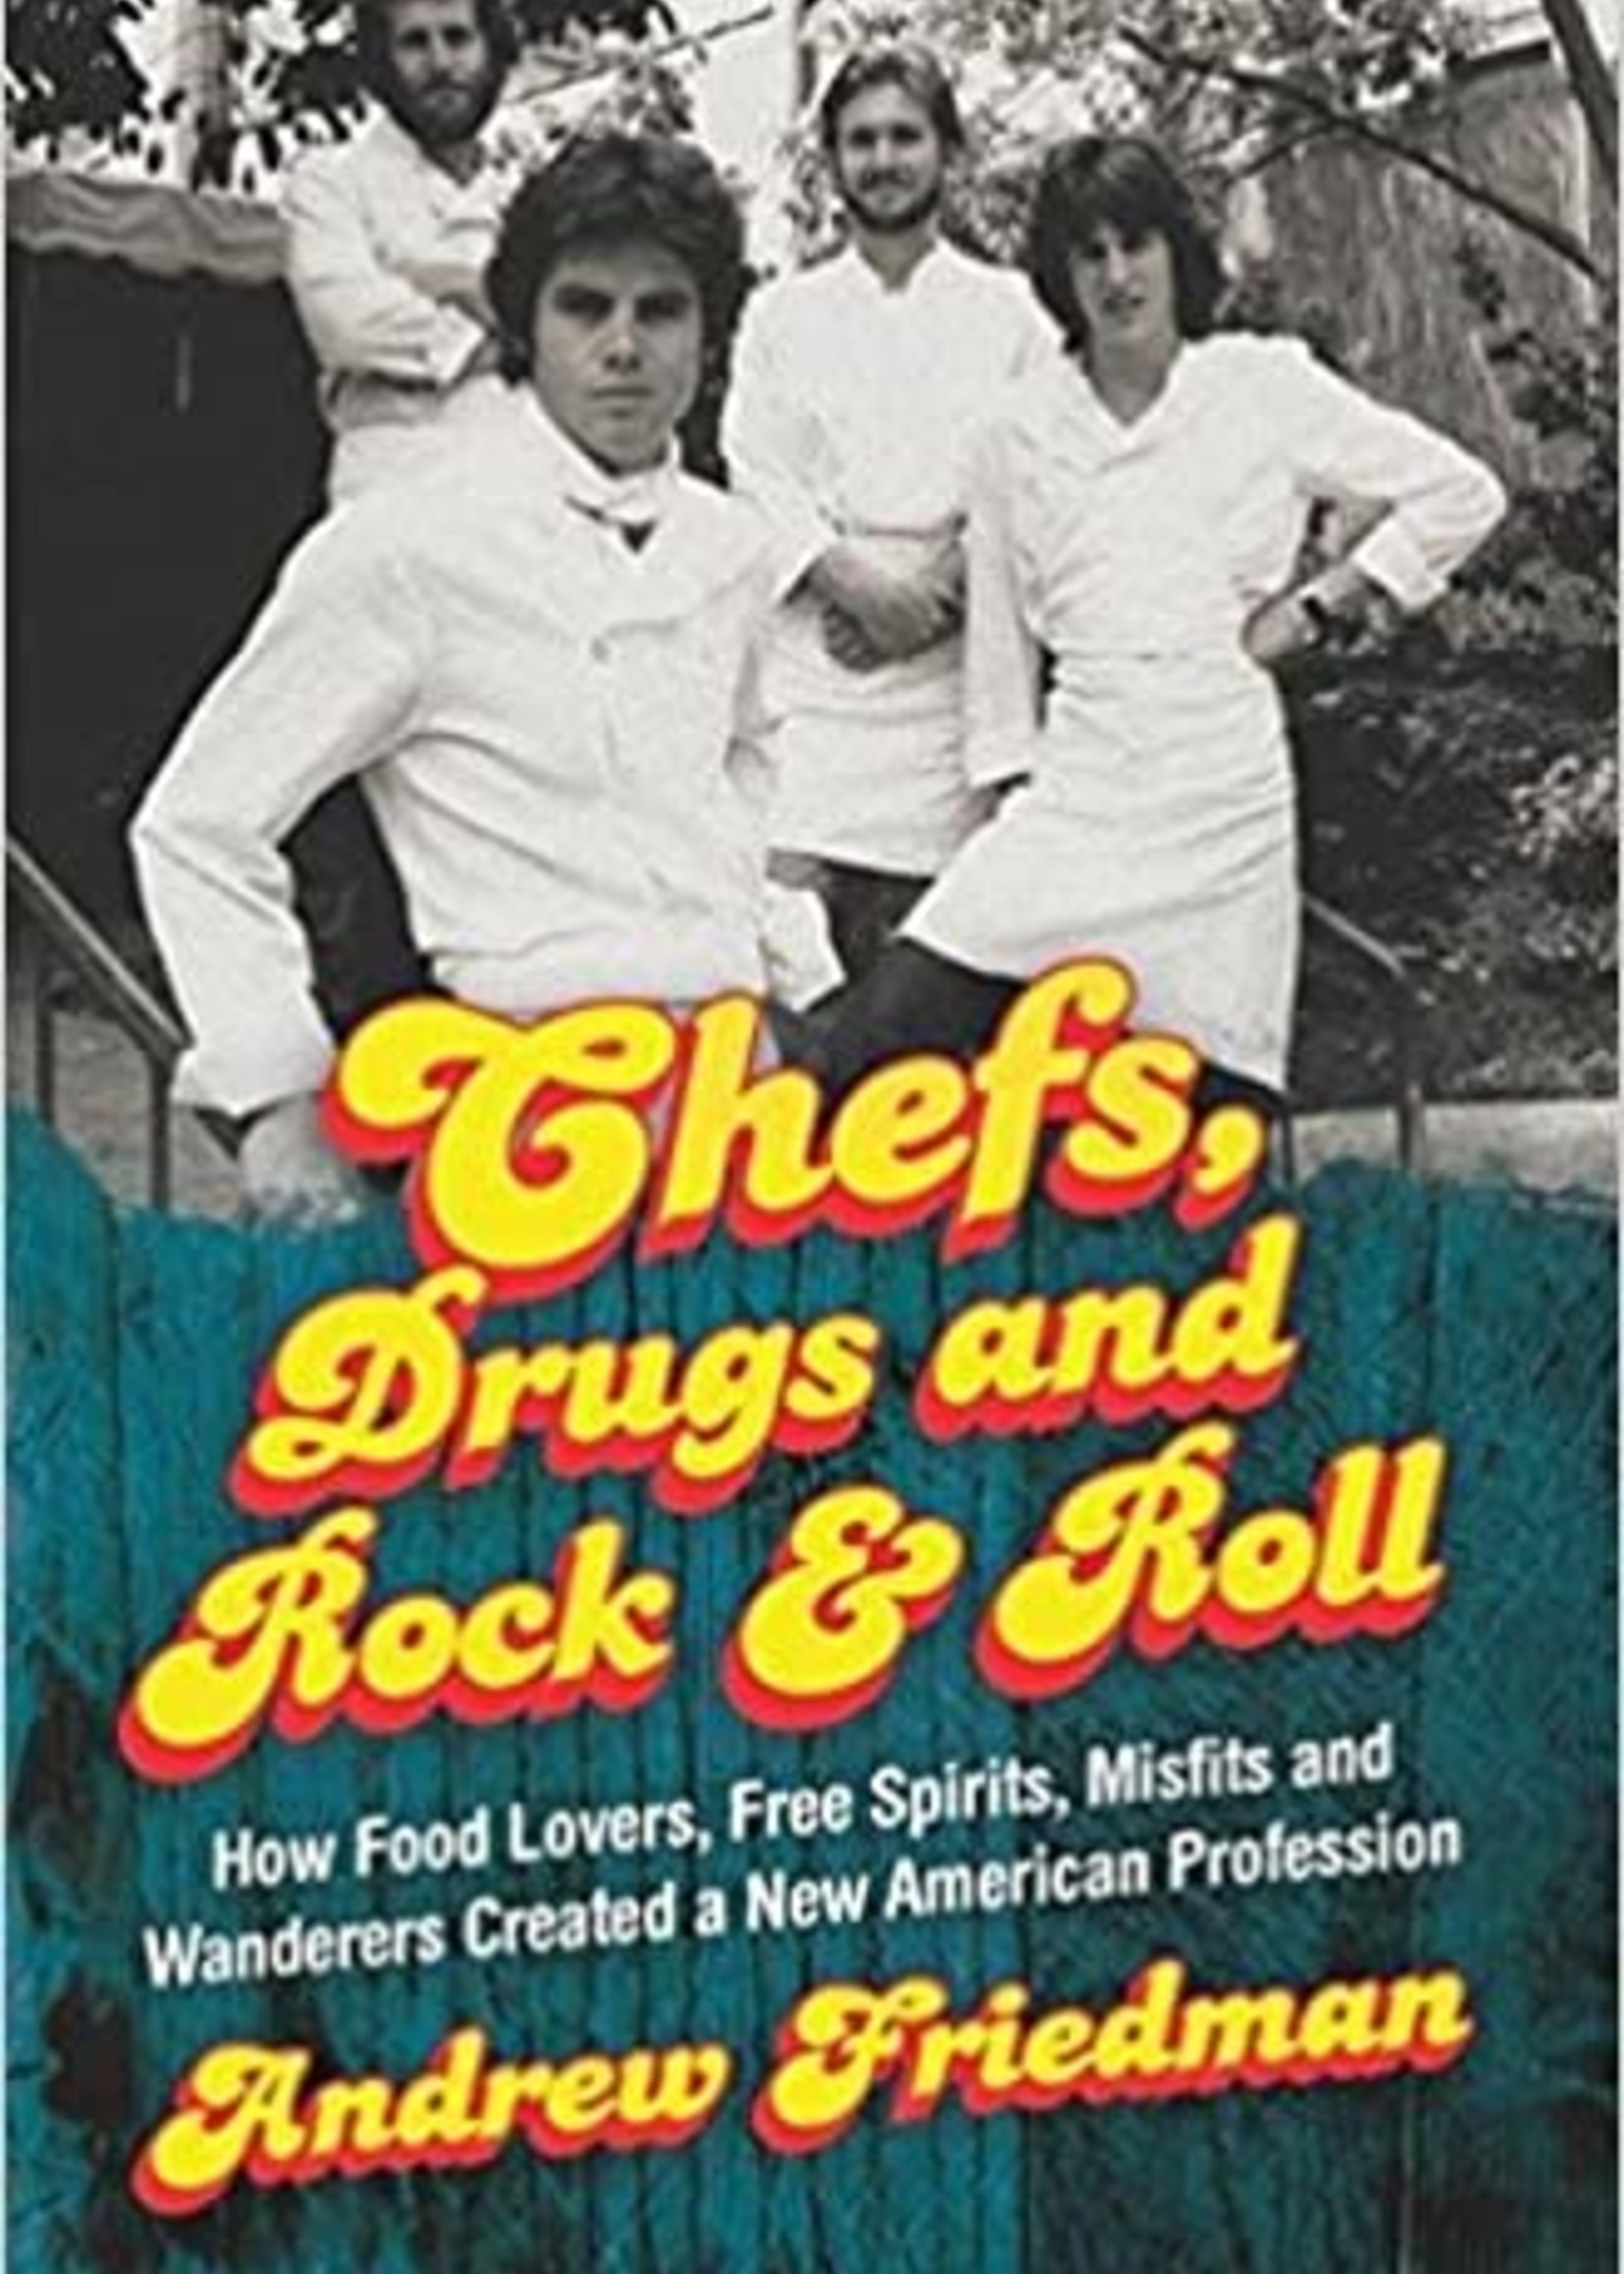 Ecco Chefs, Drugs and Rock & Roll - Andrew Friedman